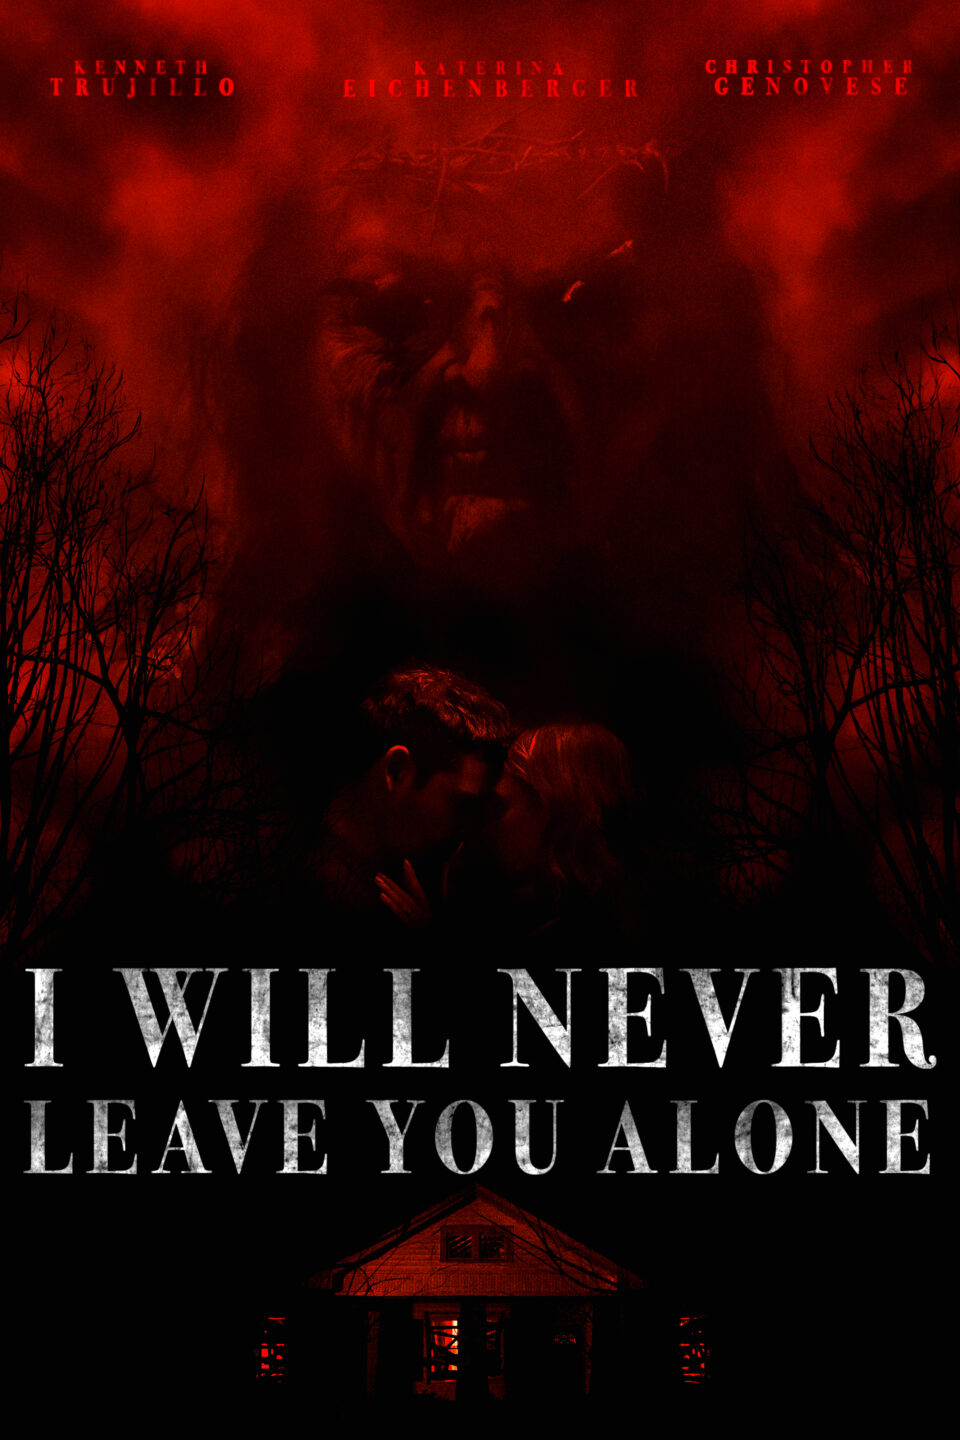 I Will Never Leave You Alone poster